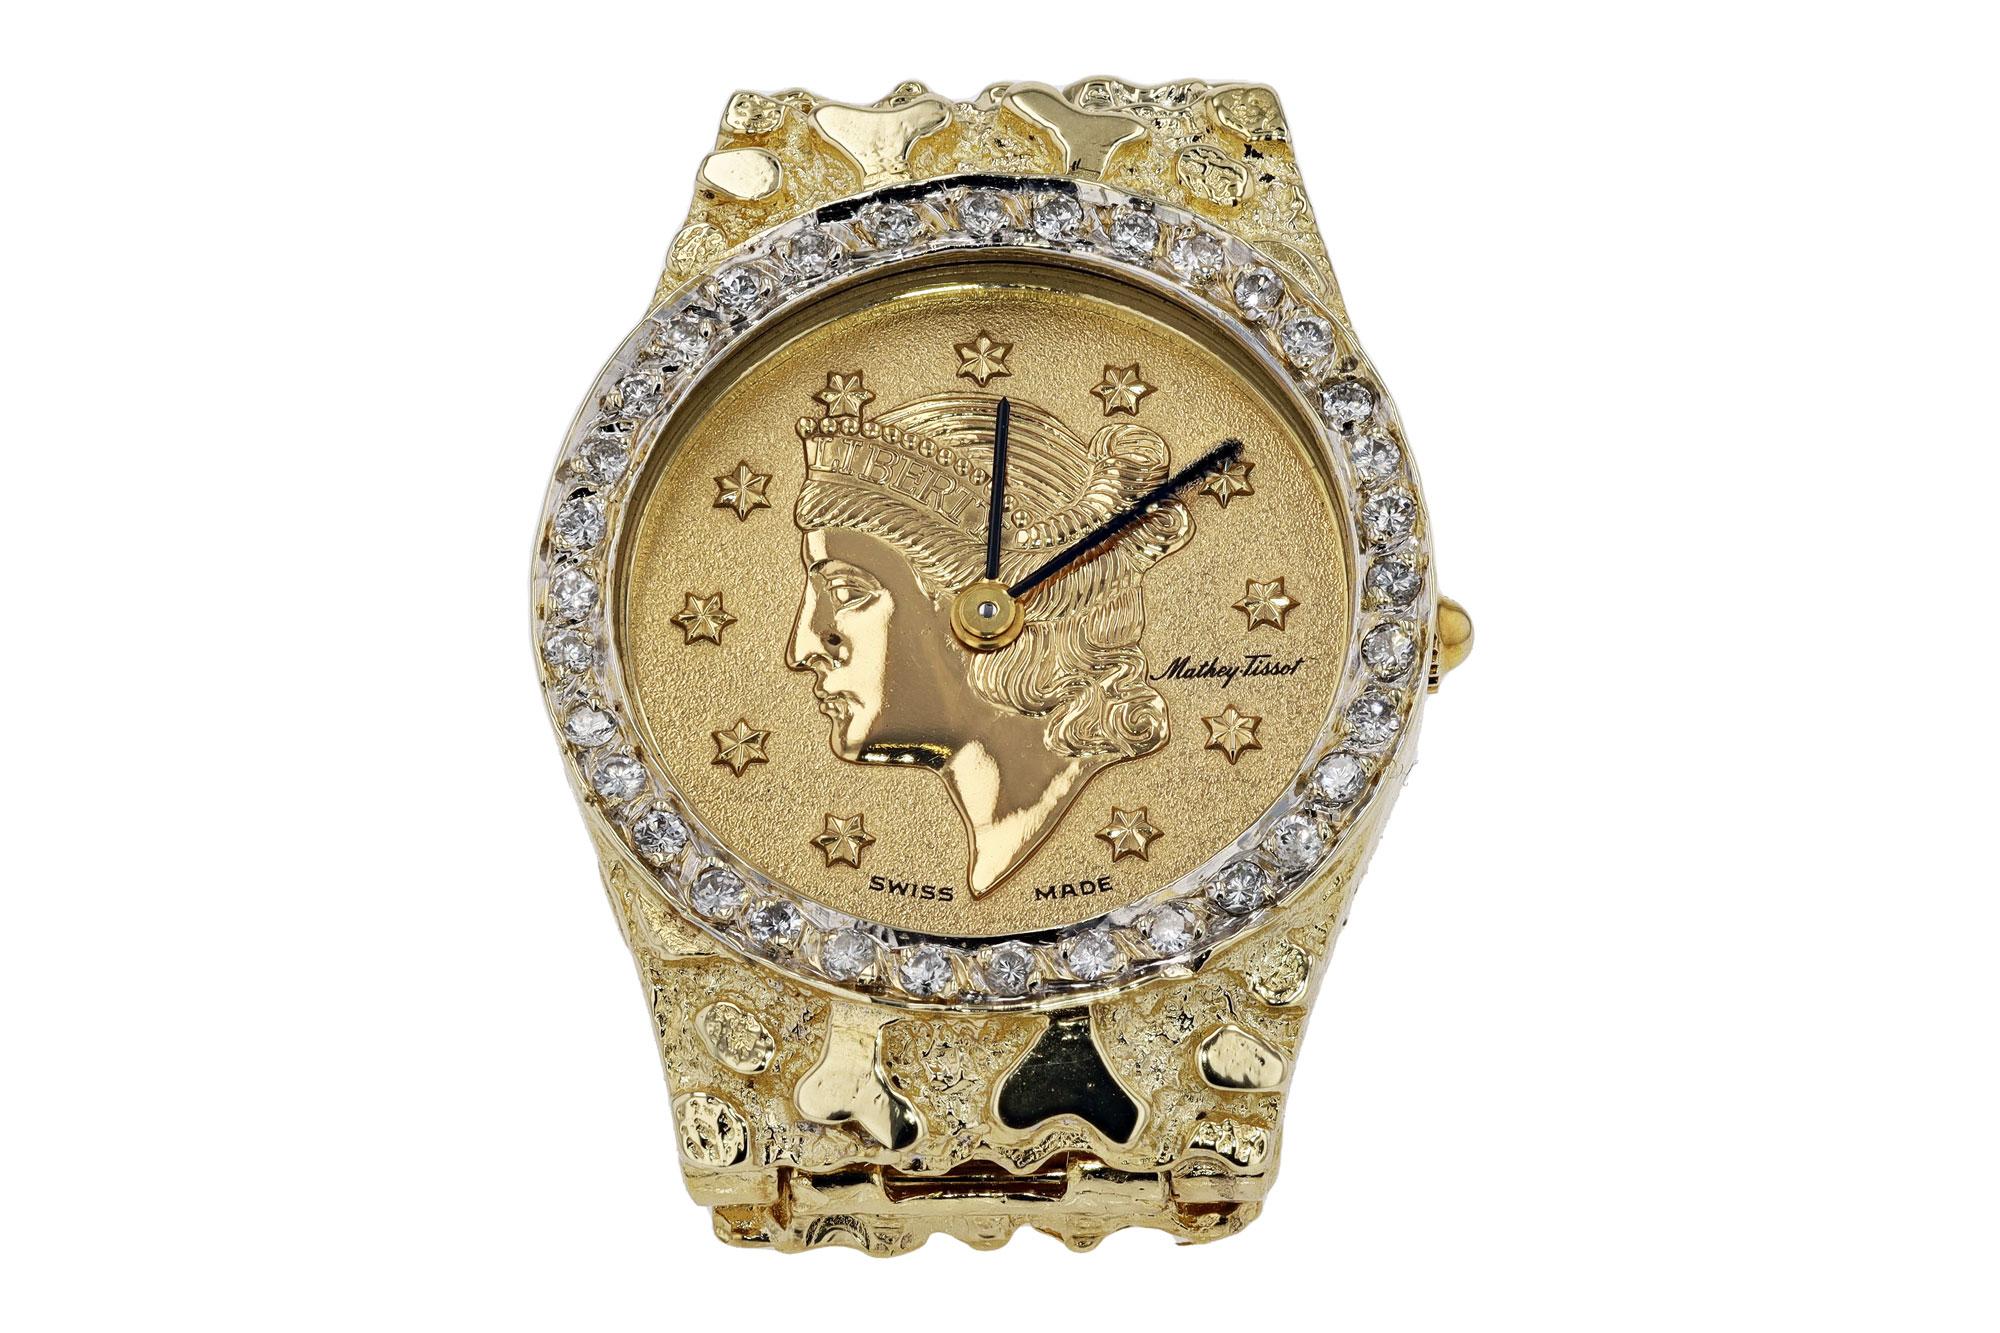 An unusual and curious vintage gold nugget style ladies' cocktail dress watch. A Liberty head coin dial is adorned with a sparkling diamond bezel of 1/3 carats. Powered by a Mathey-Tissot Swiss quartz movement and made with nearly 2 ounces of 14